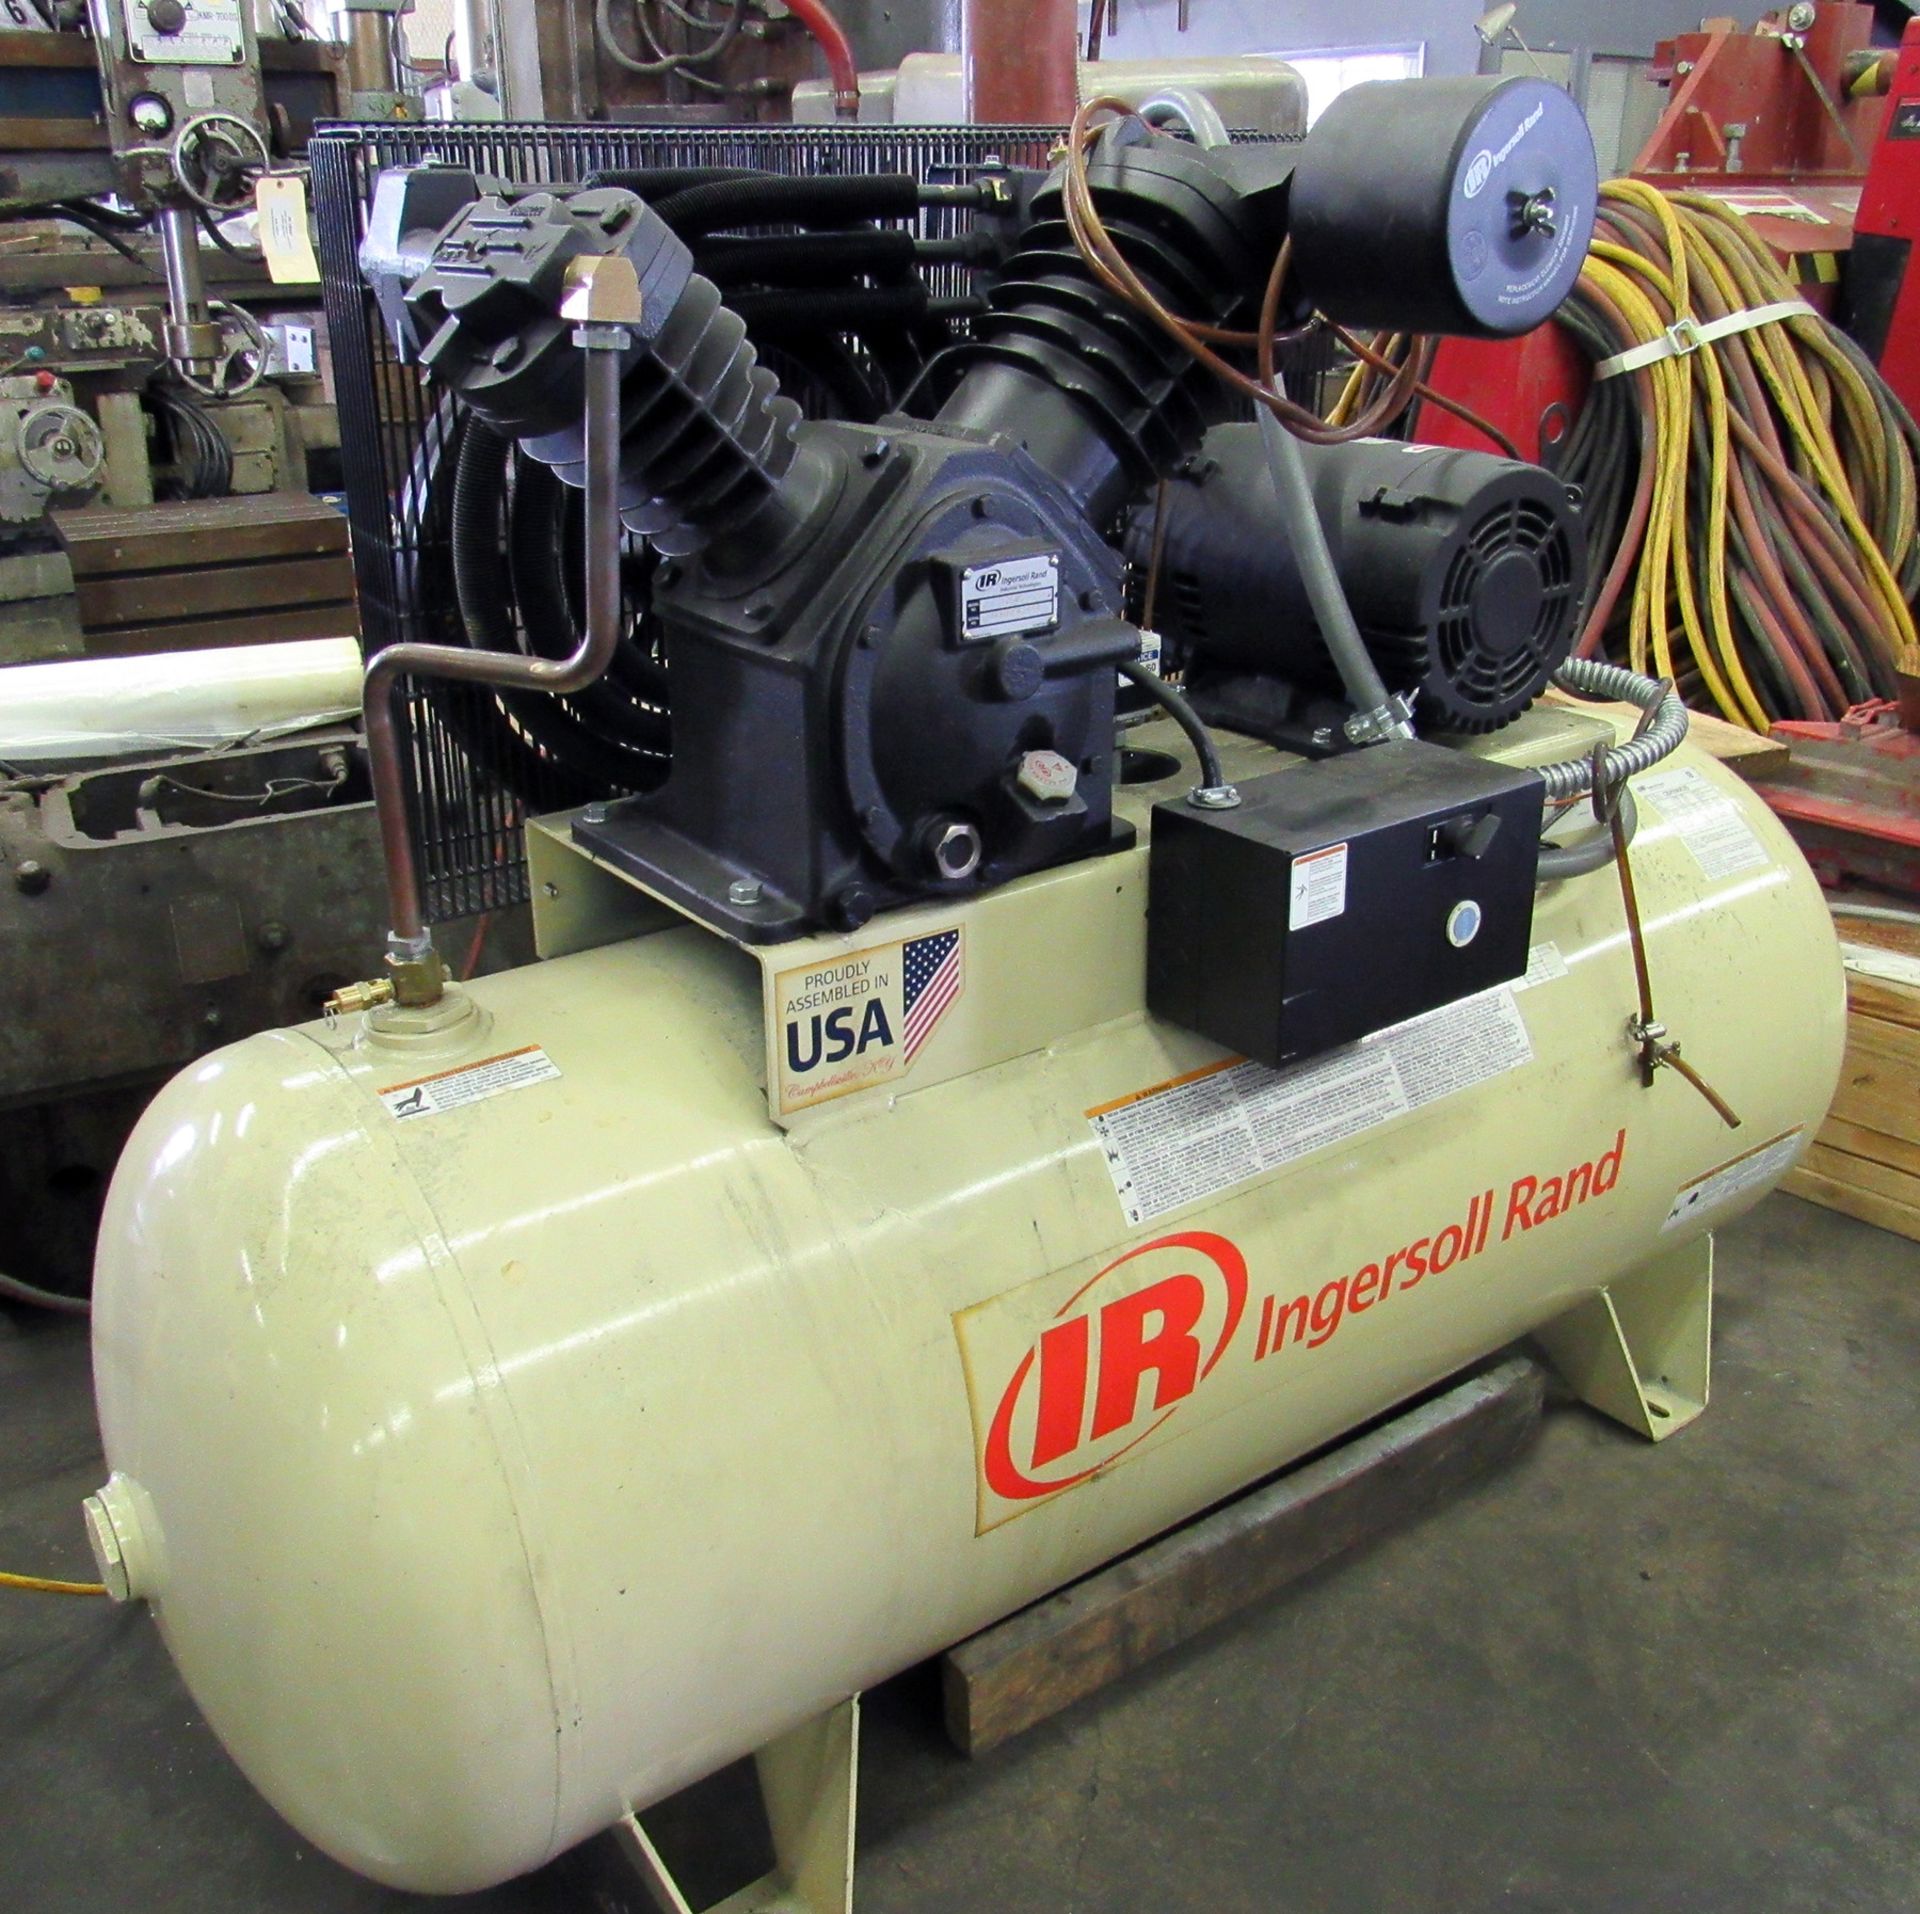 INGERSOLL RAND MODEL 2545 TANK MOUNTED AIR COMPRESSOR - Image 3 of 7